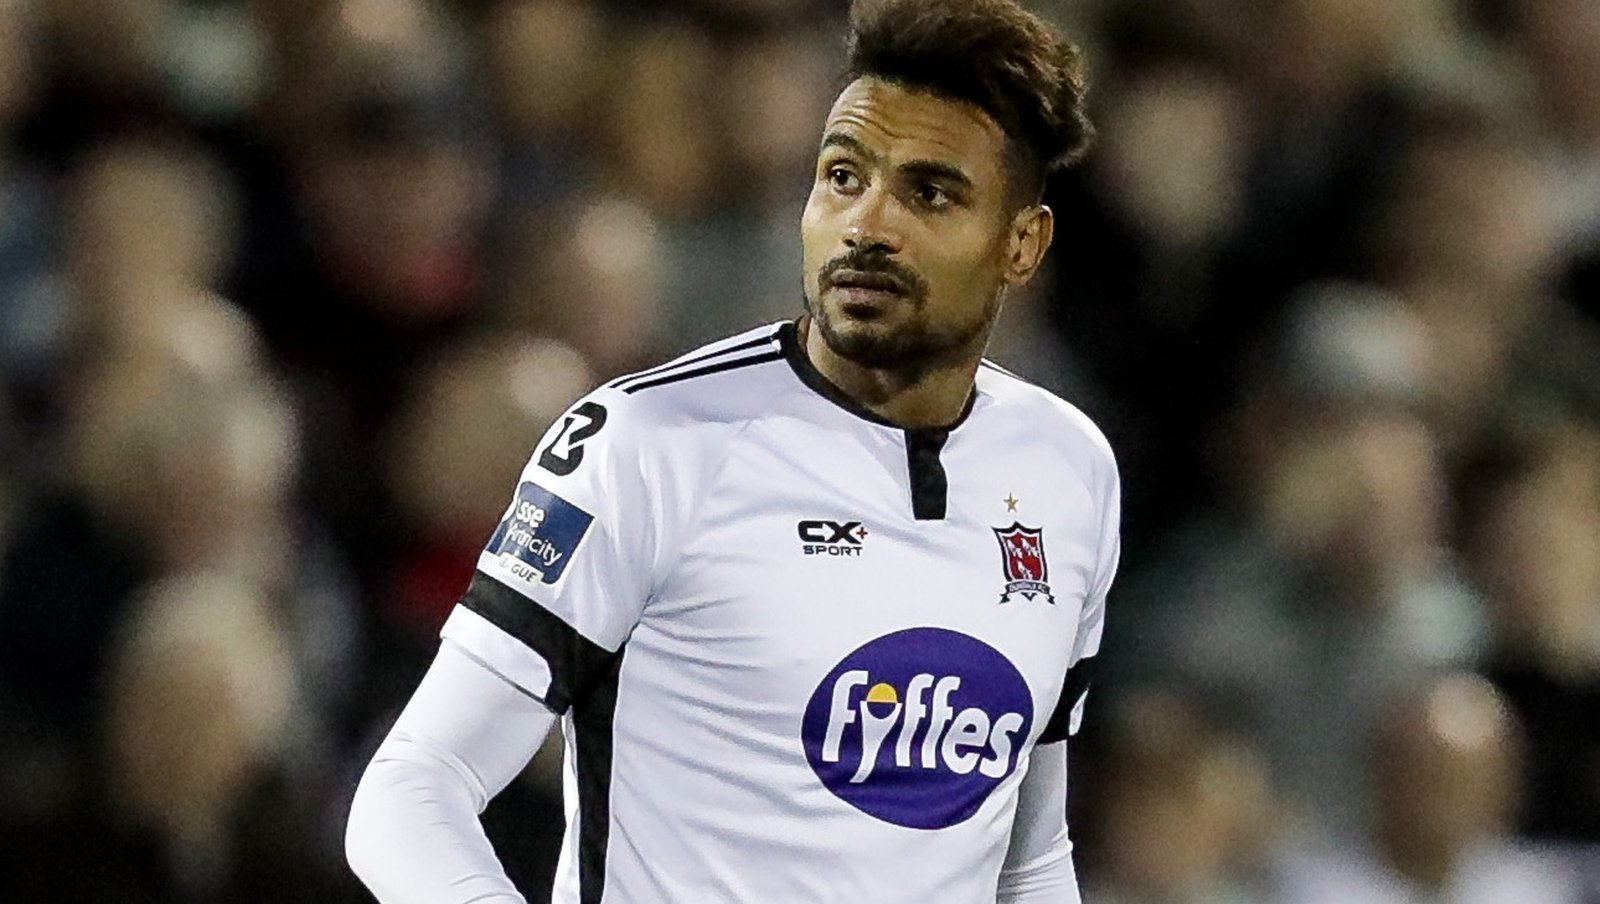 Dundalk stand firm for a fourth league win on the spin